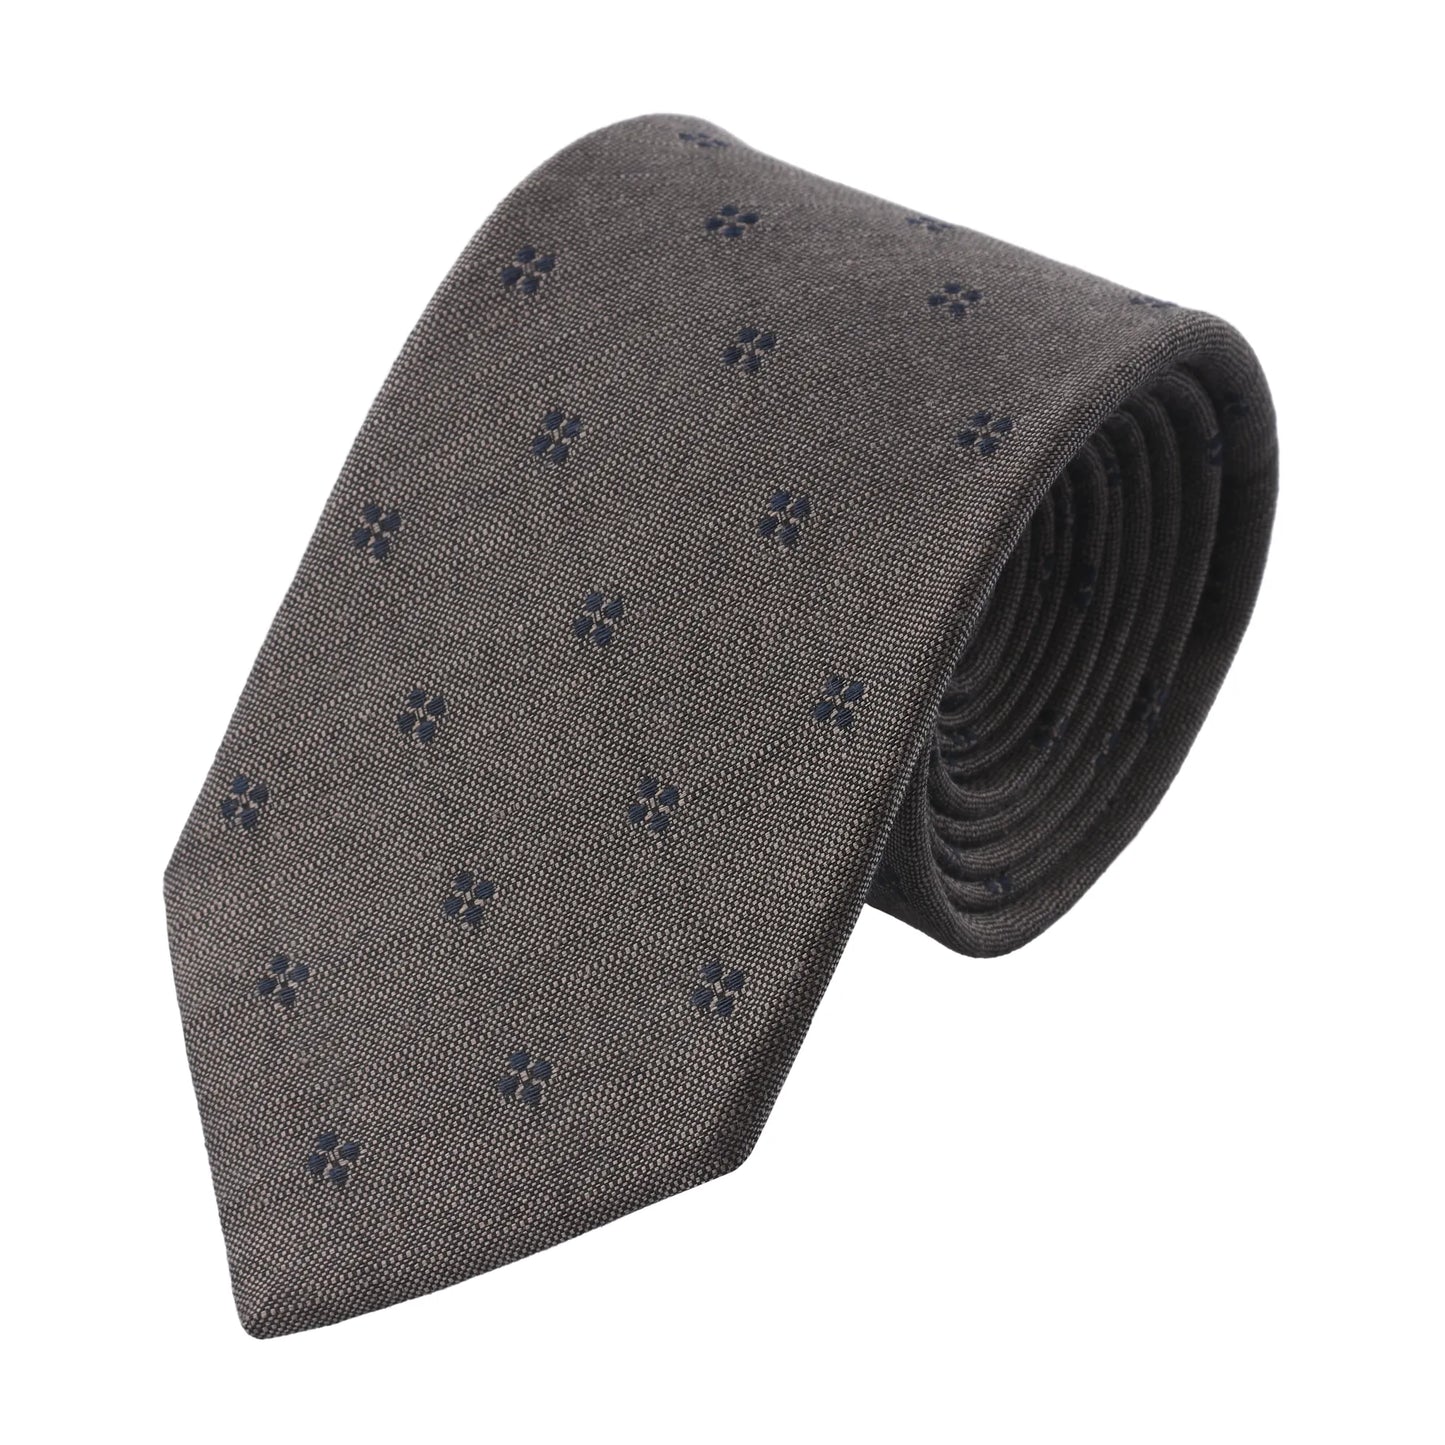 Jacquard Linen and Silk-Blend Tie in Brown